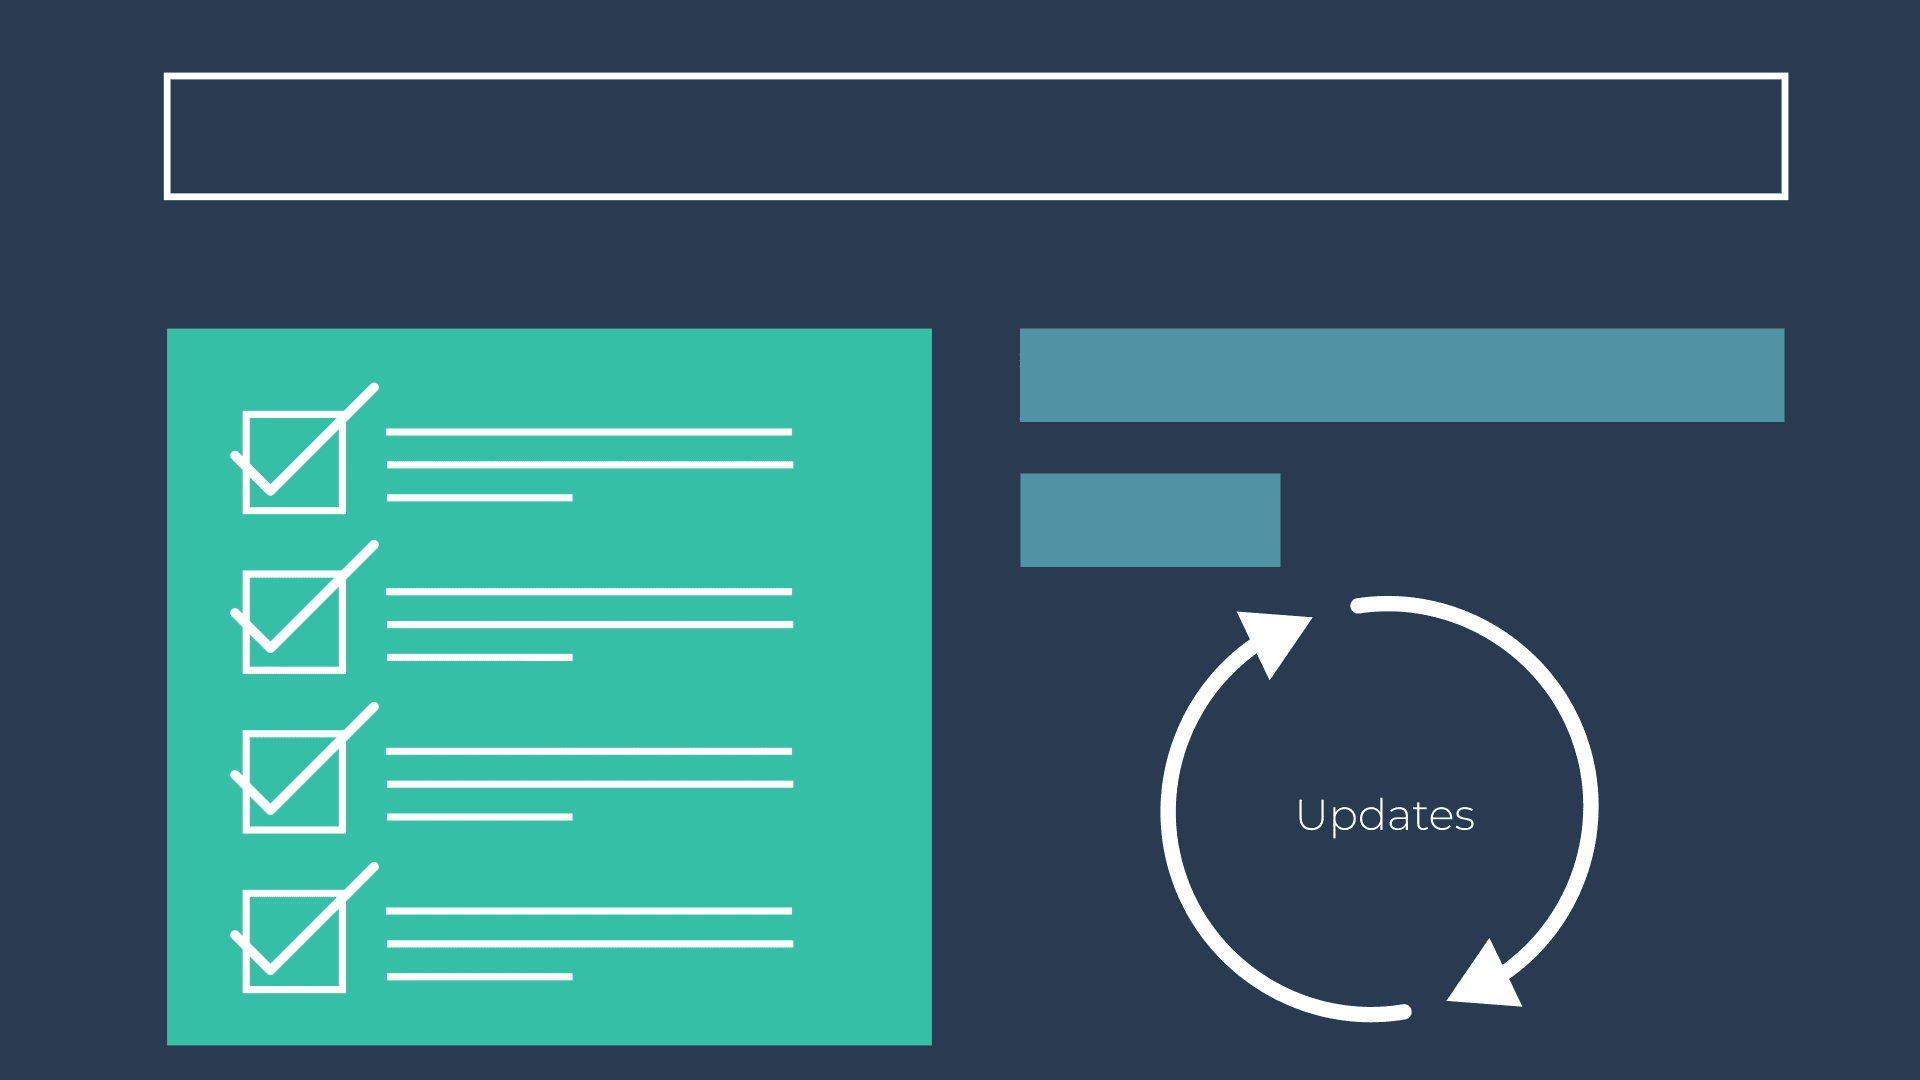 A checklist for the updates you need for your website